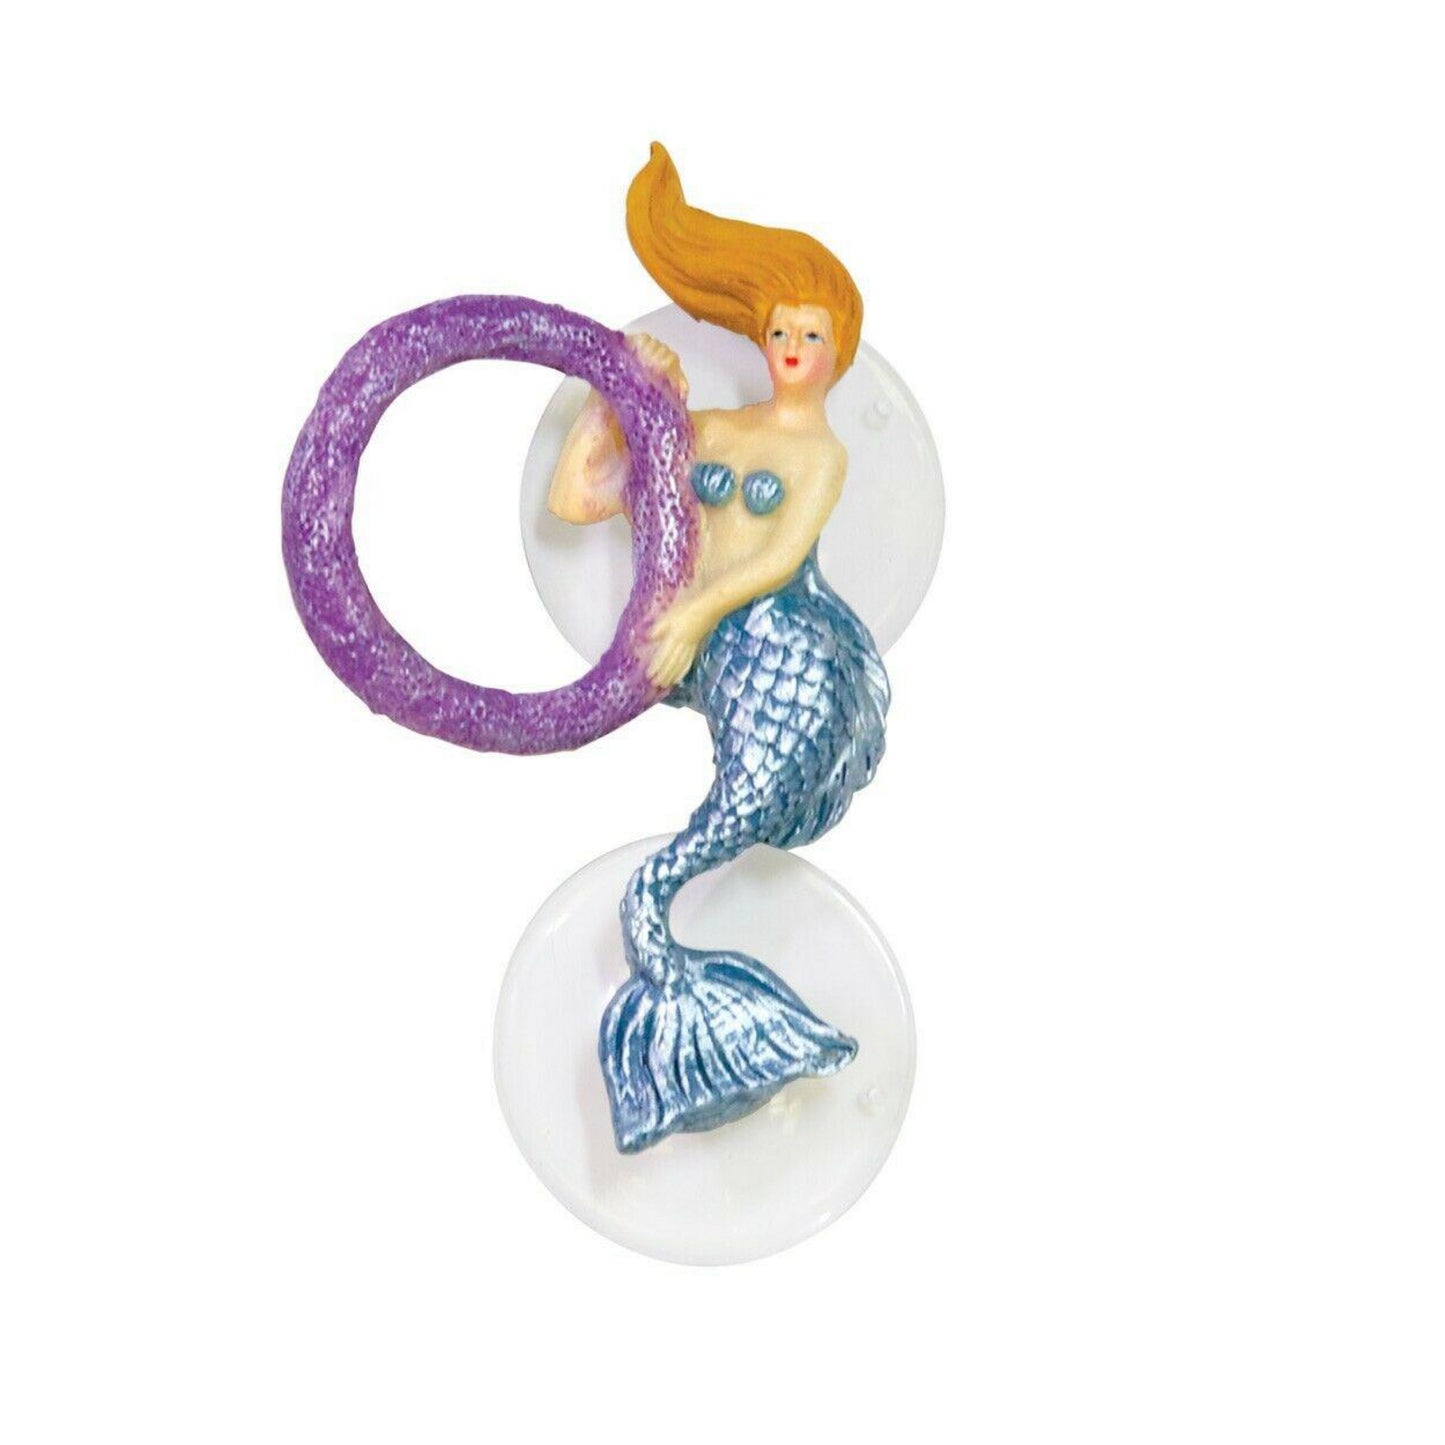 Zoo Med Betta Bling Mermaid with Hoop Black 2 x 1 x 1 Inches